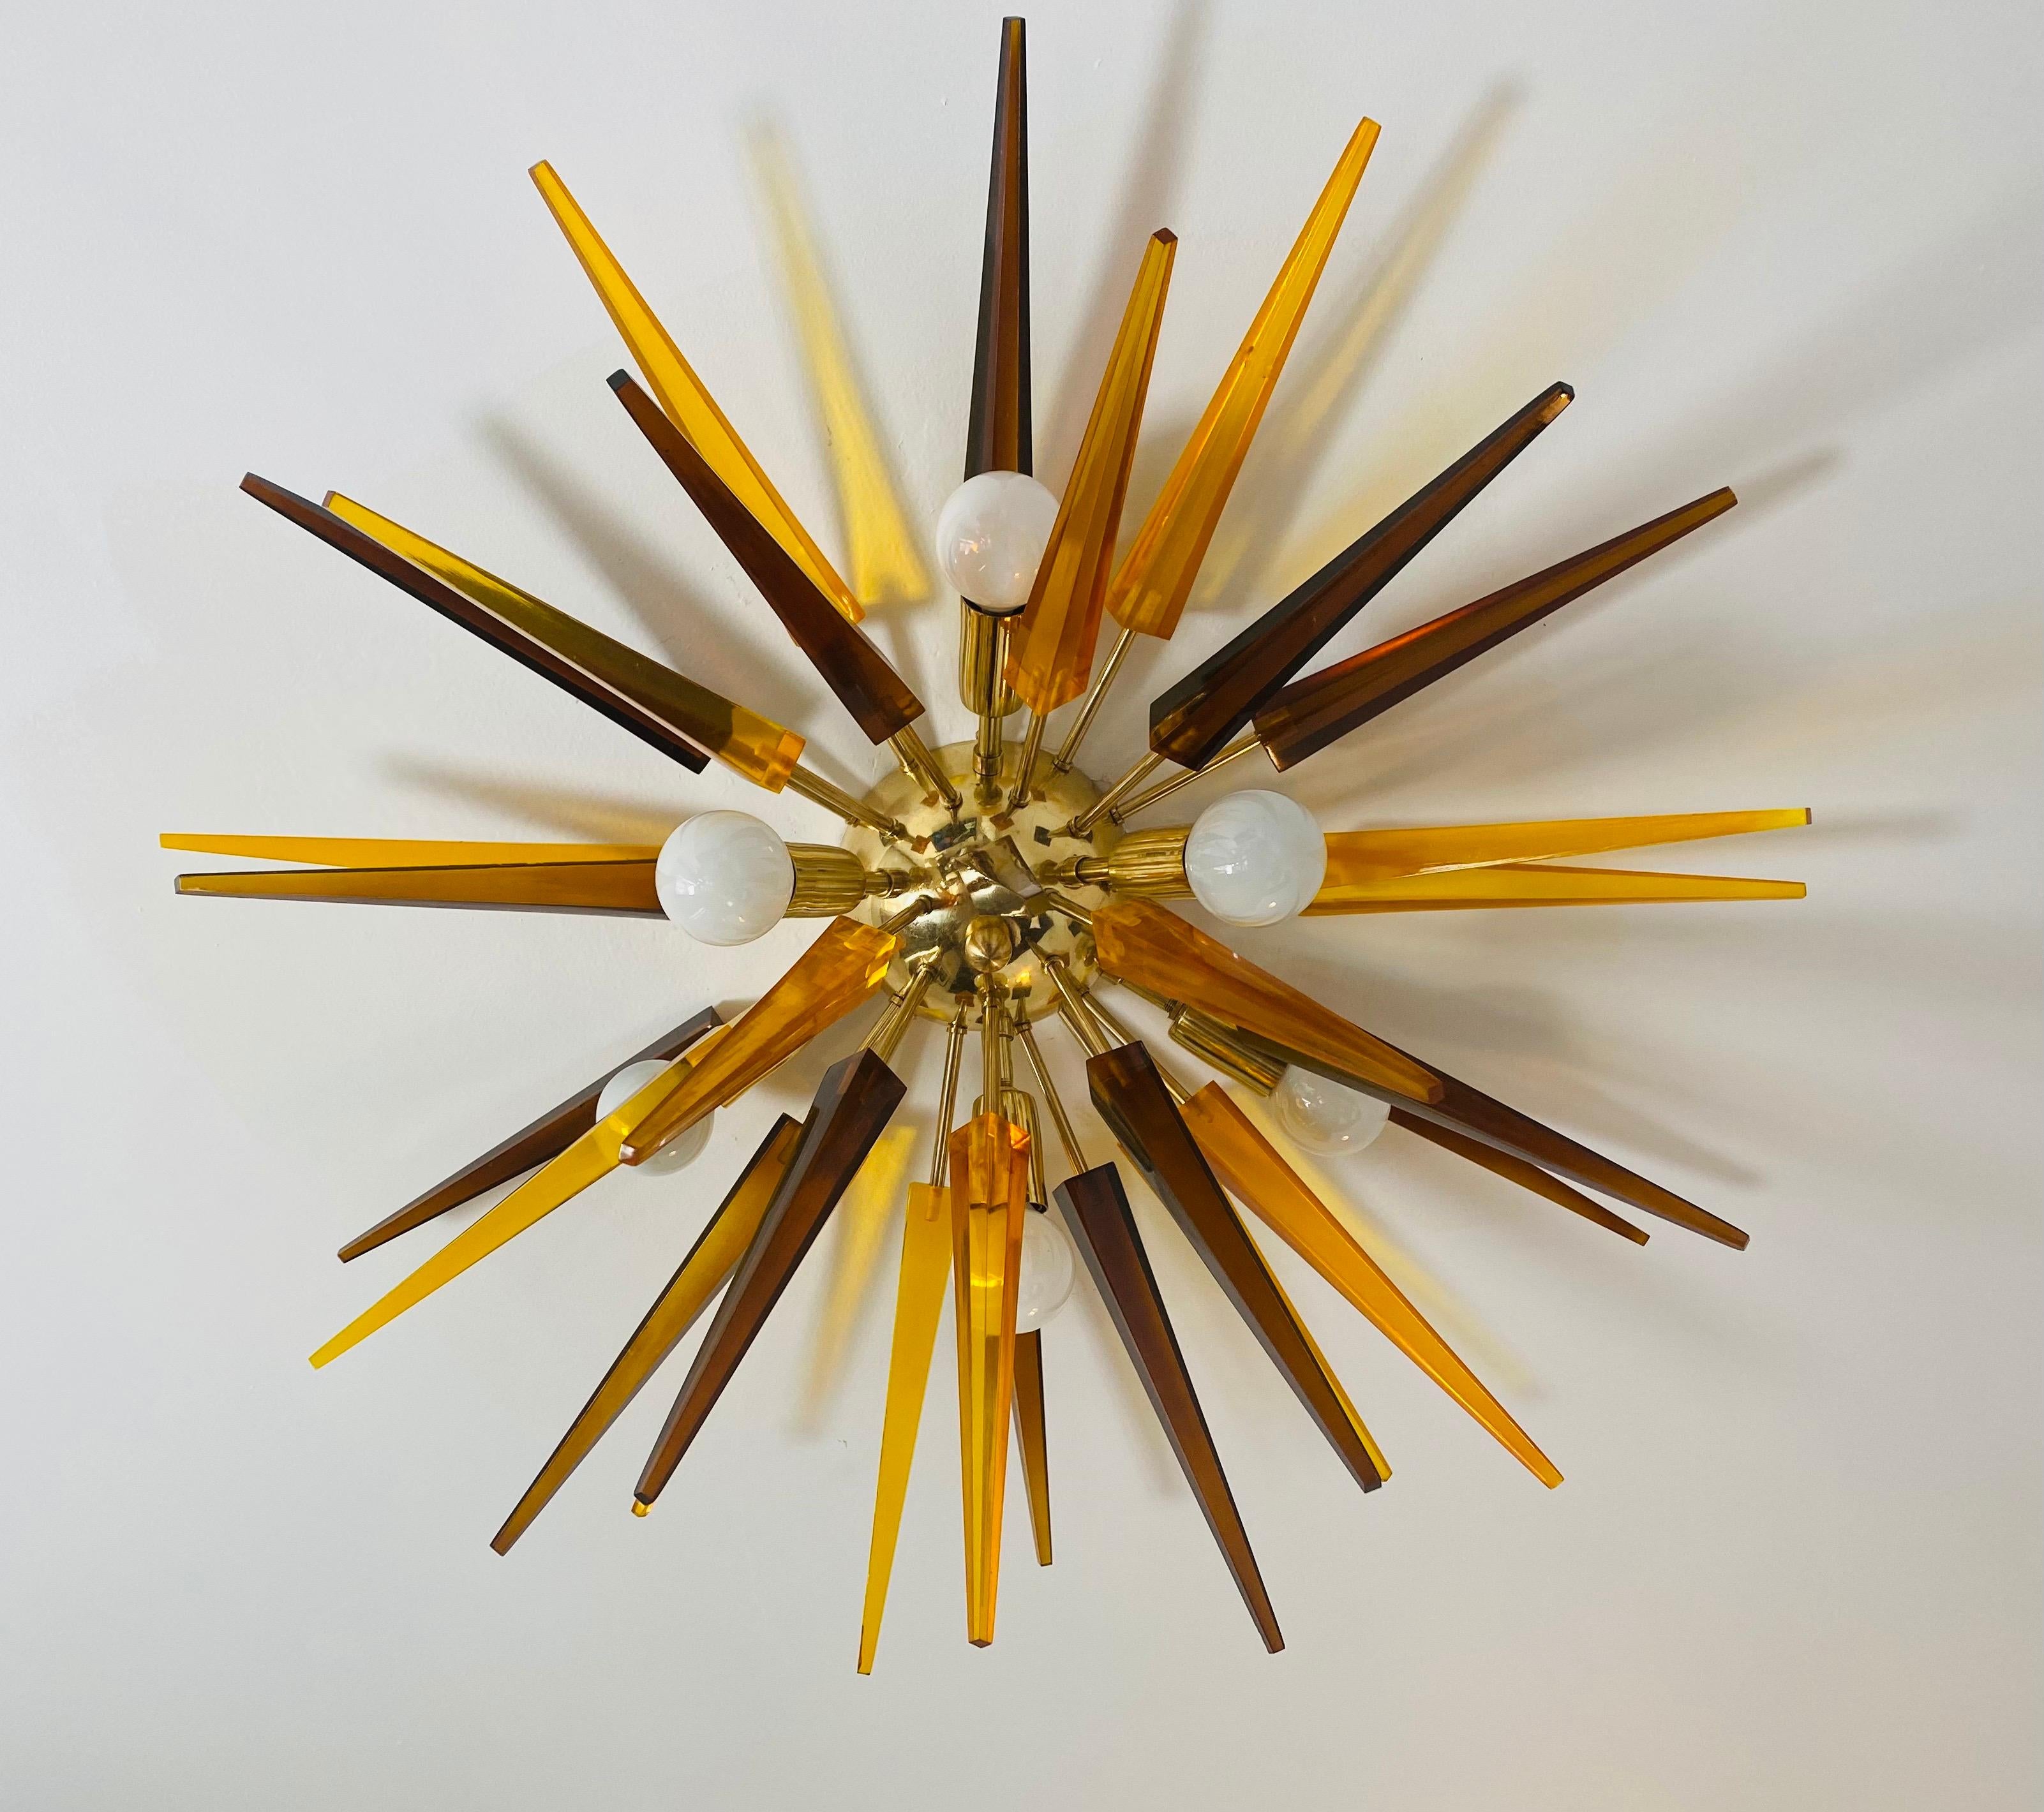 A wonderful orange and tea colored resin prisms on a golden brass fixture. Rewired. Six light sources. Can be used on the ceiling or wall.